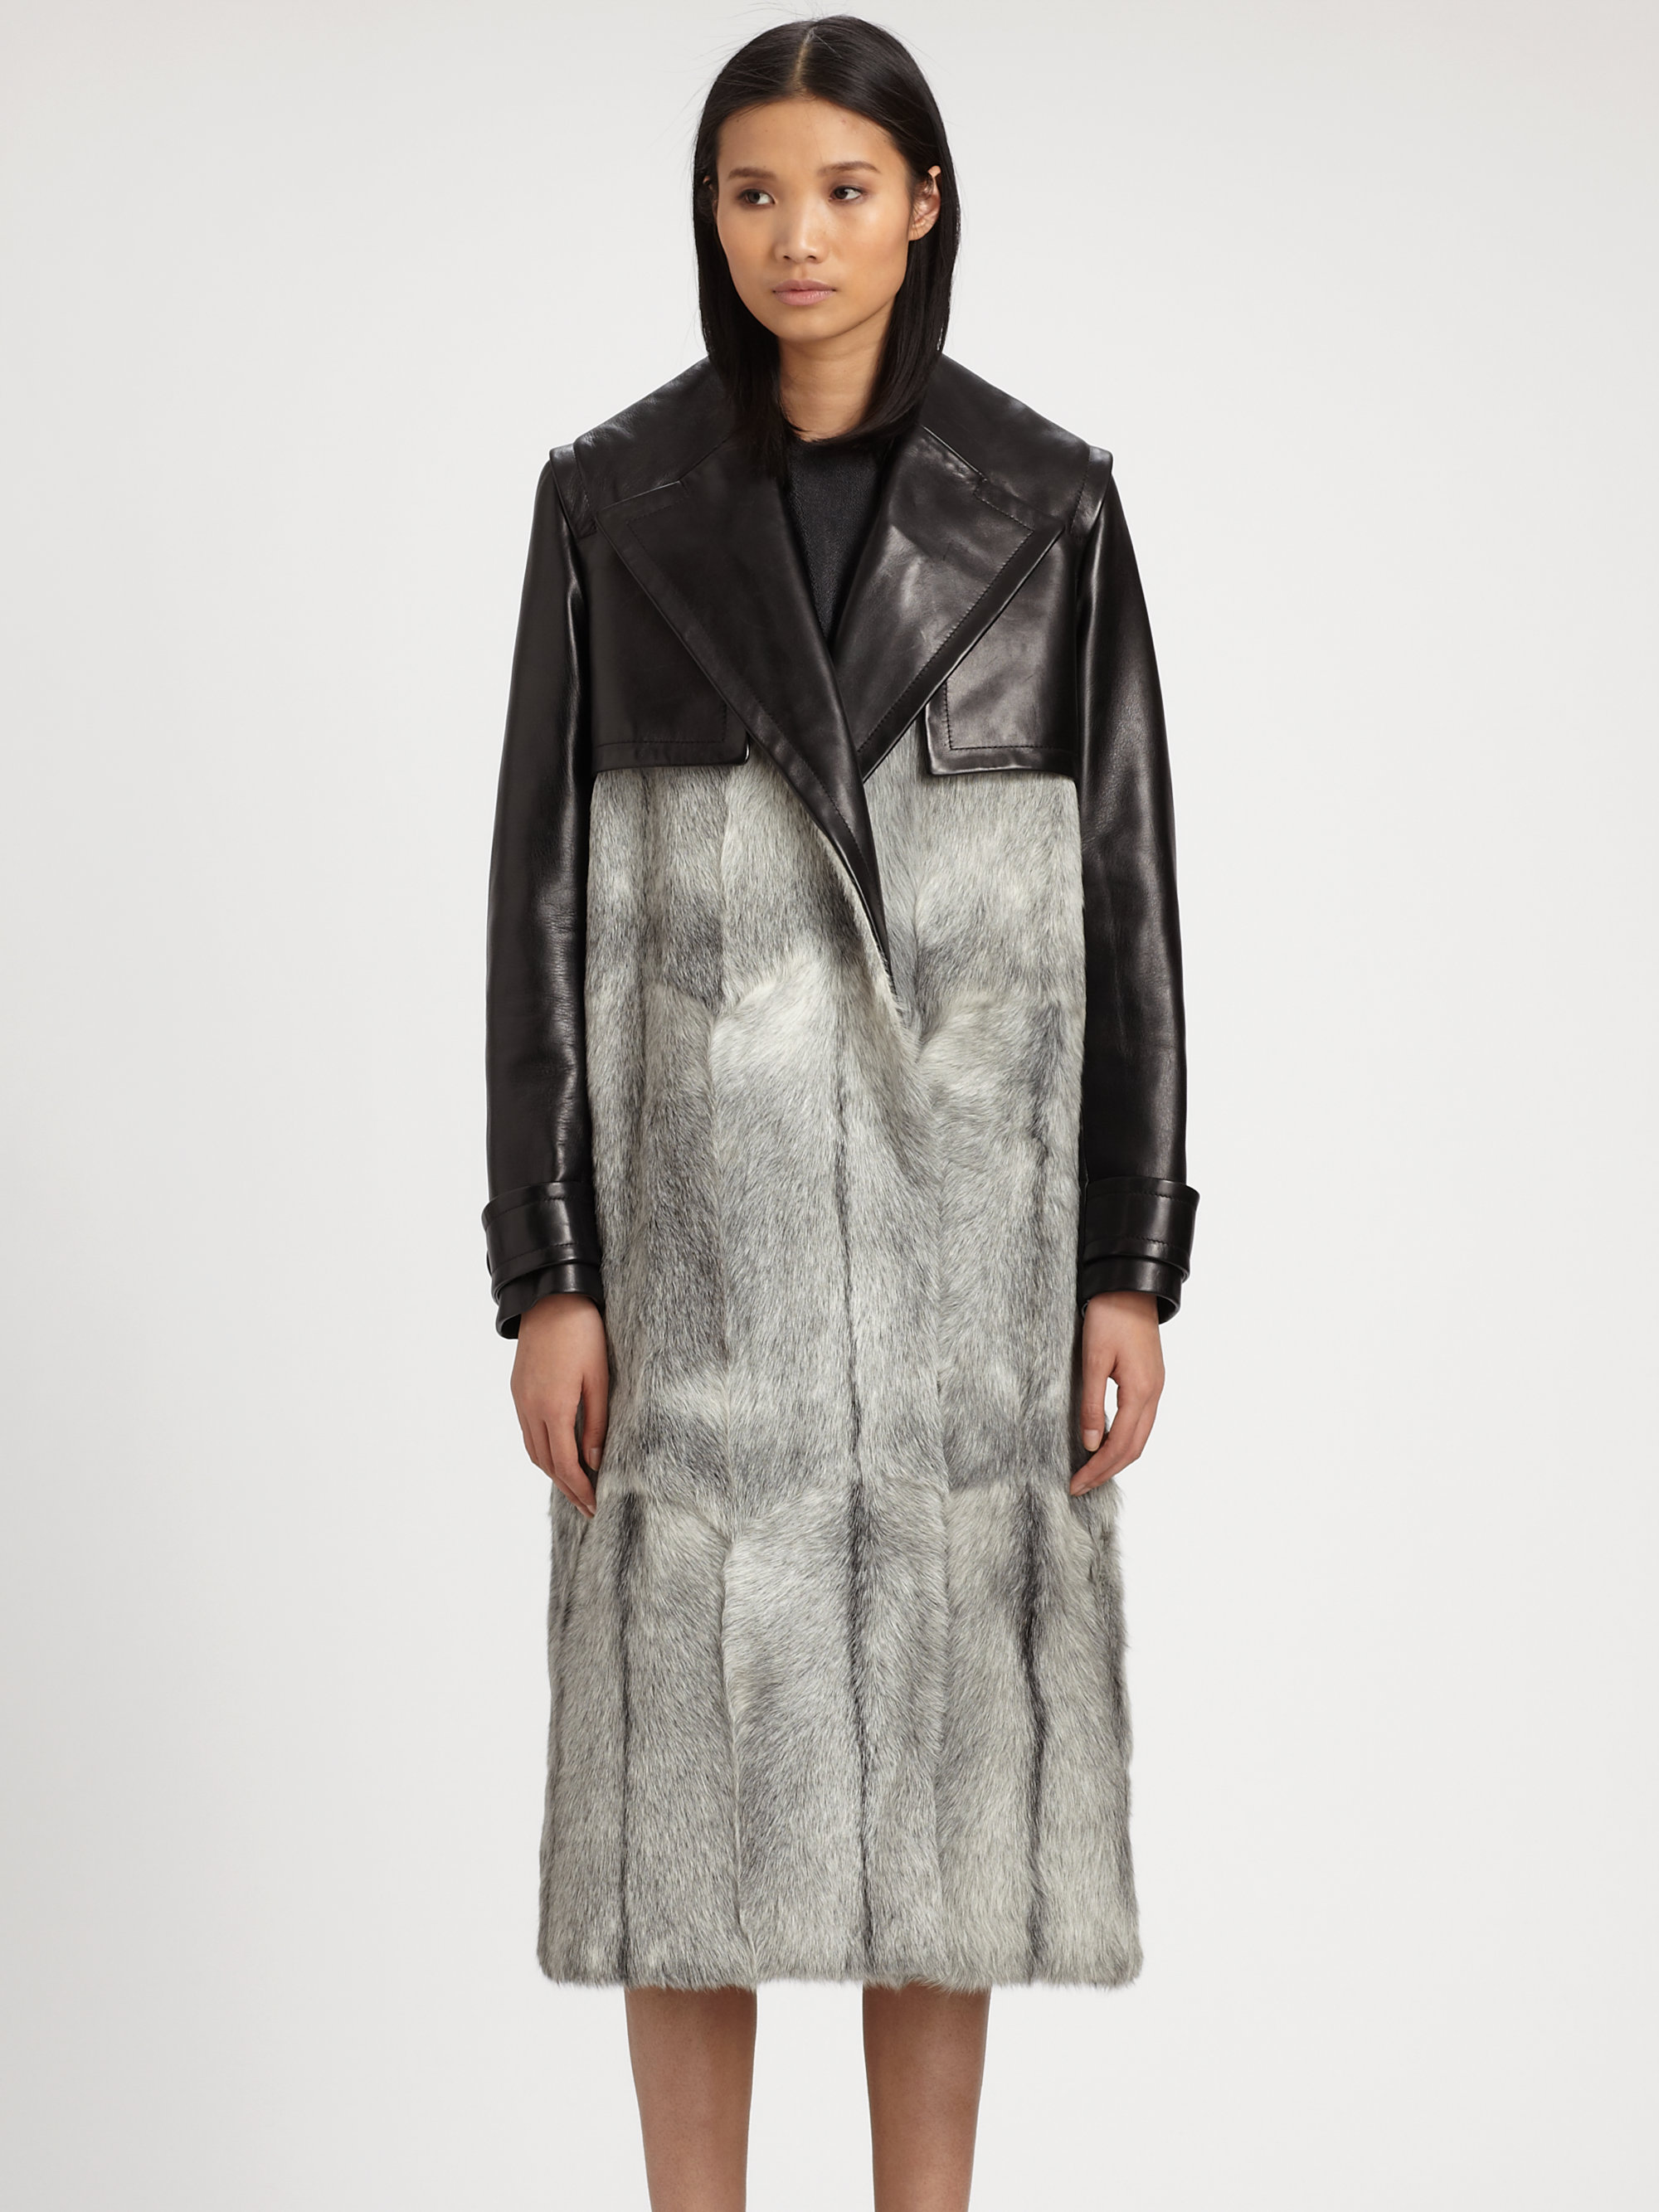 Alexander wang Goat Fur Leather Trench Coat in Black | Lyst